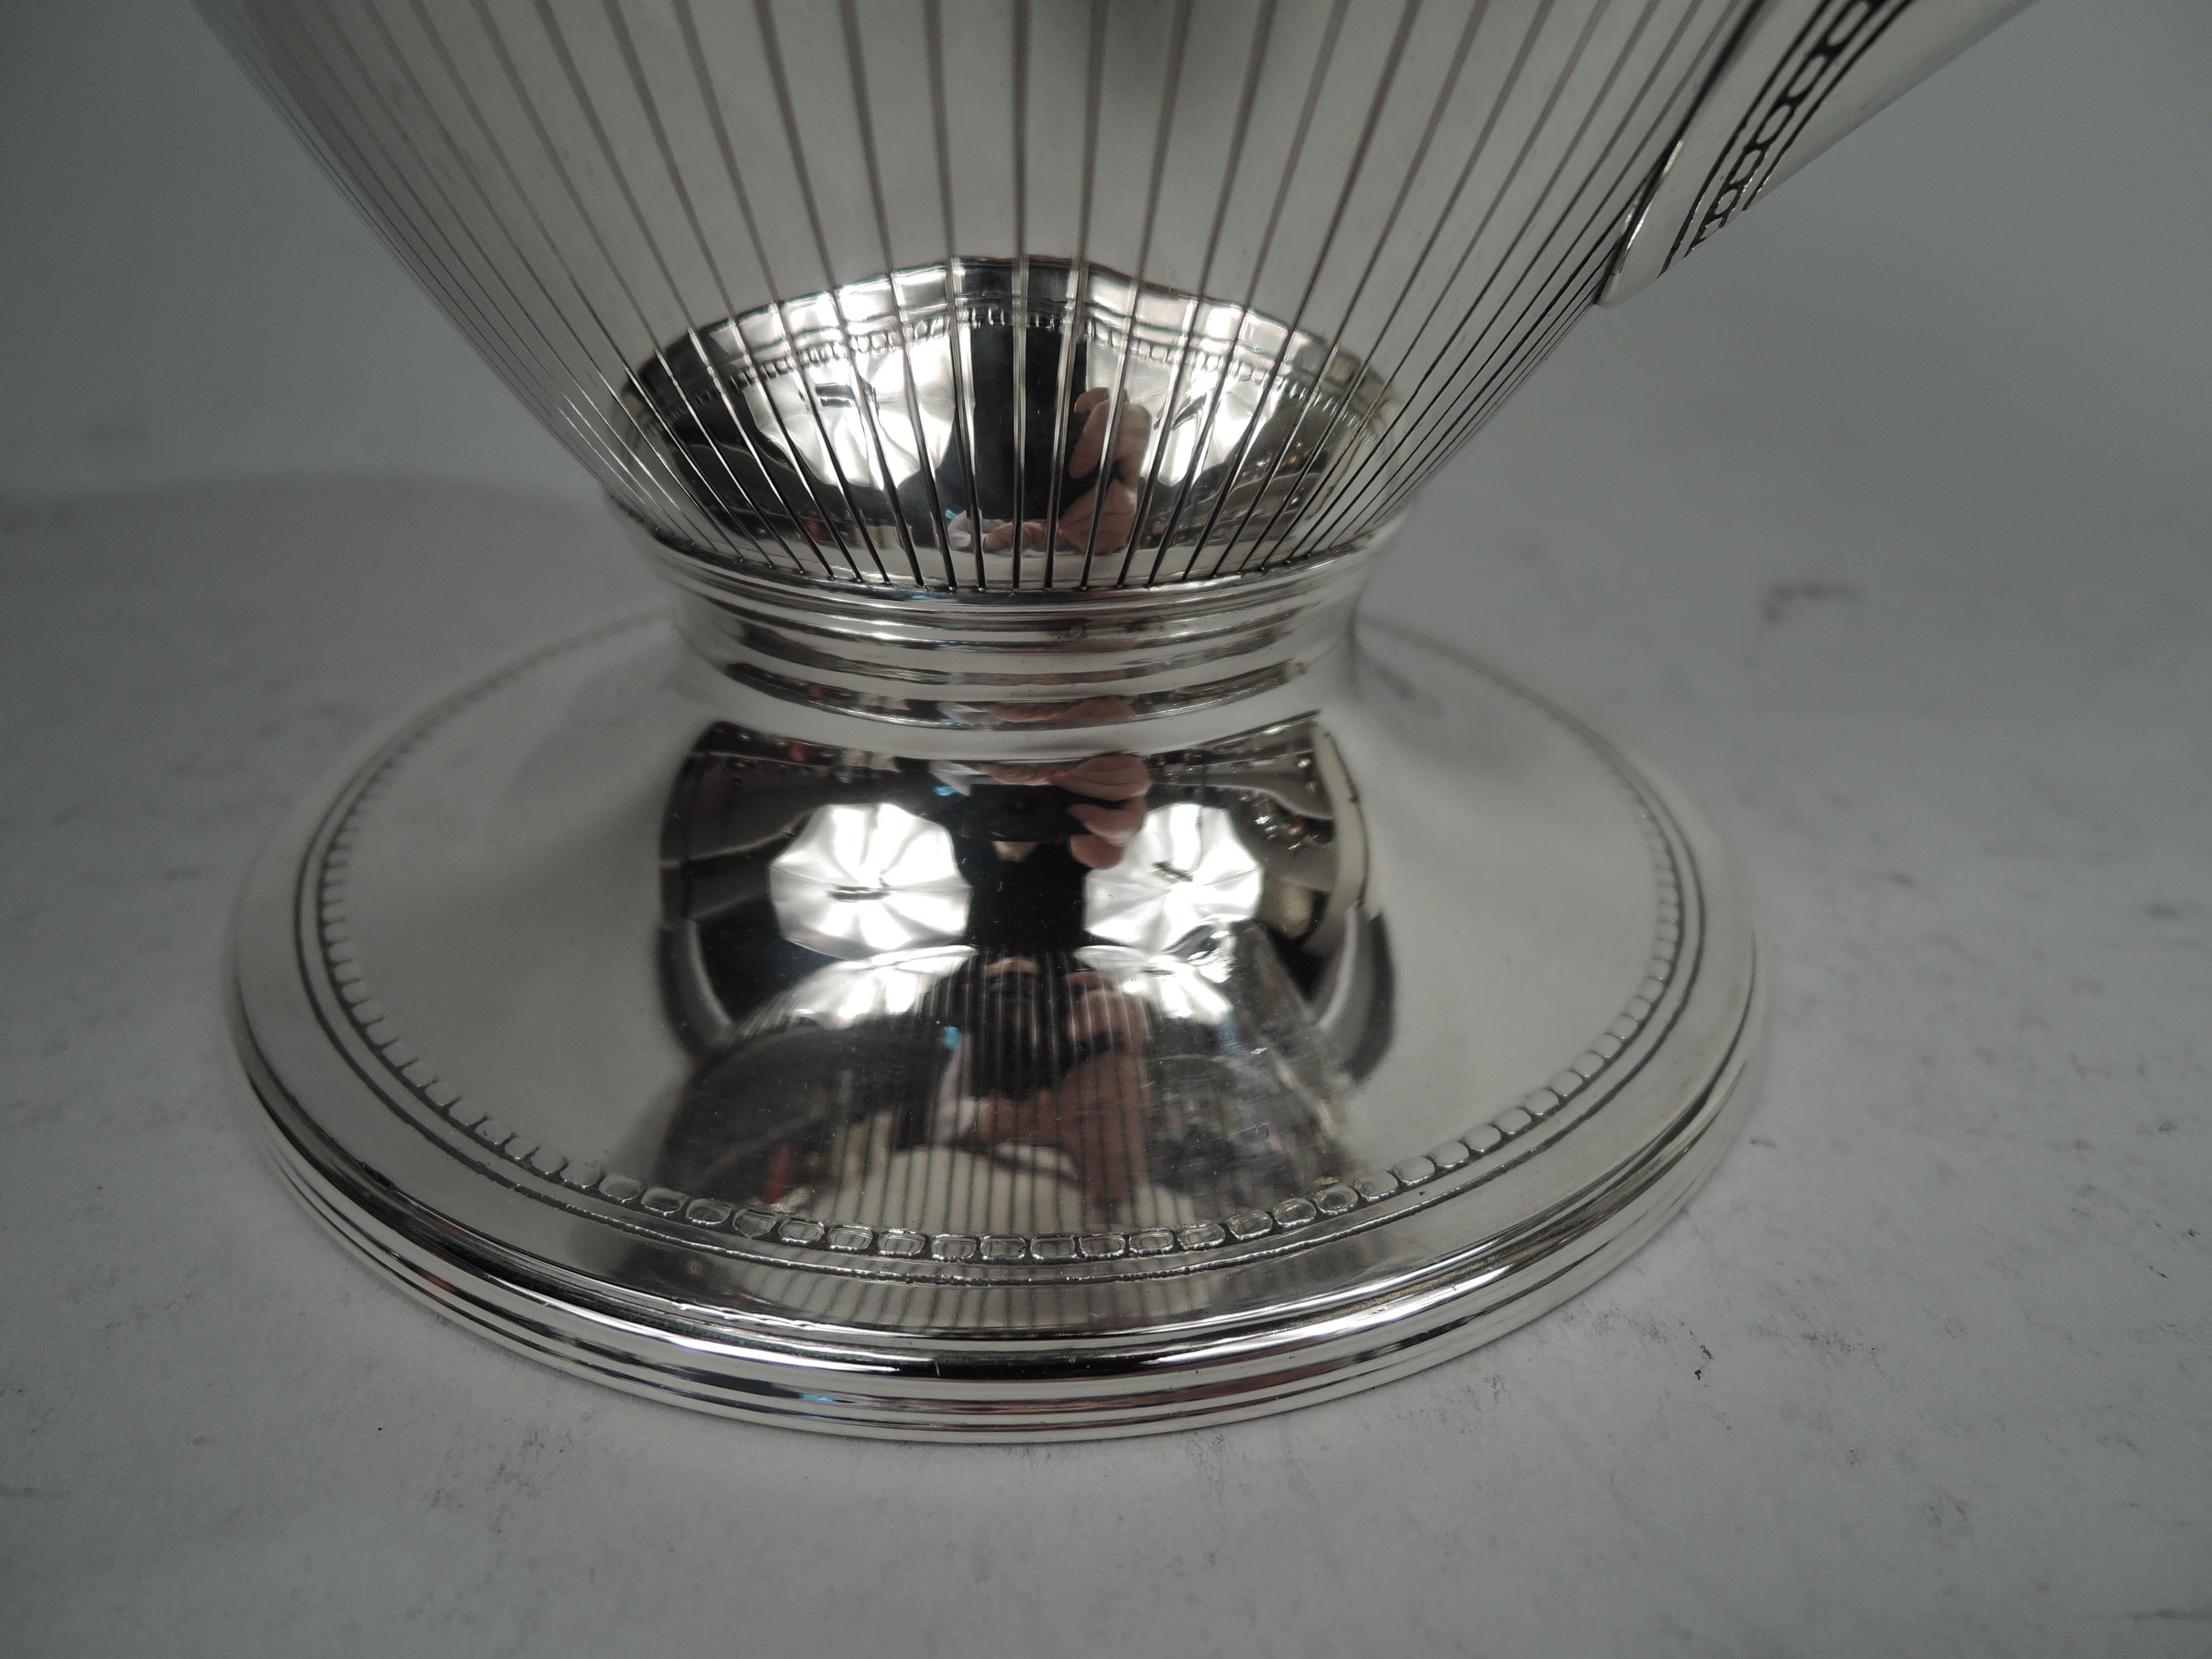 20th Century Tiffany Winthrop Drinks Set for 6 with Pitcher & Goblets on Tray For Sale